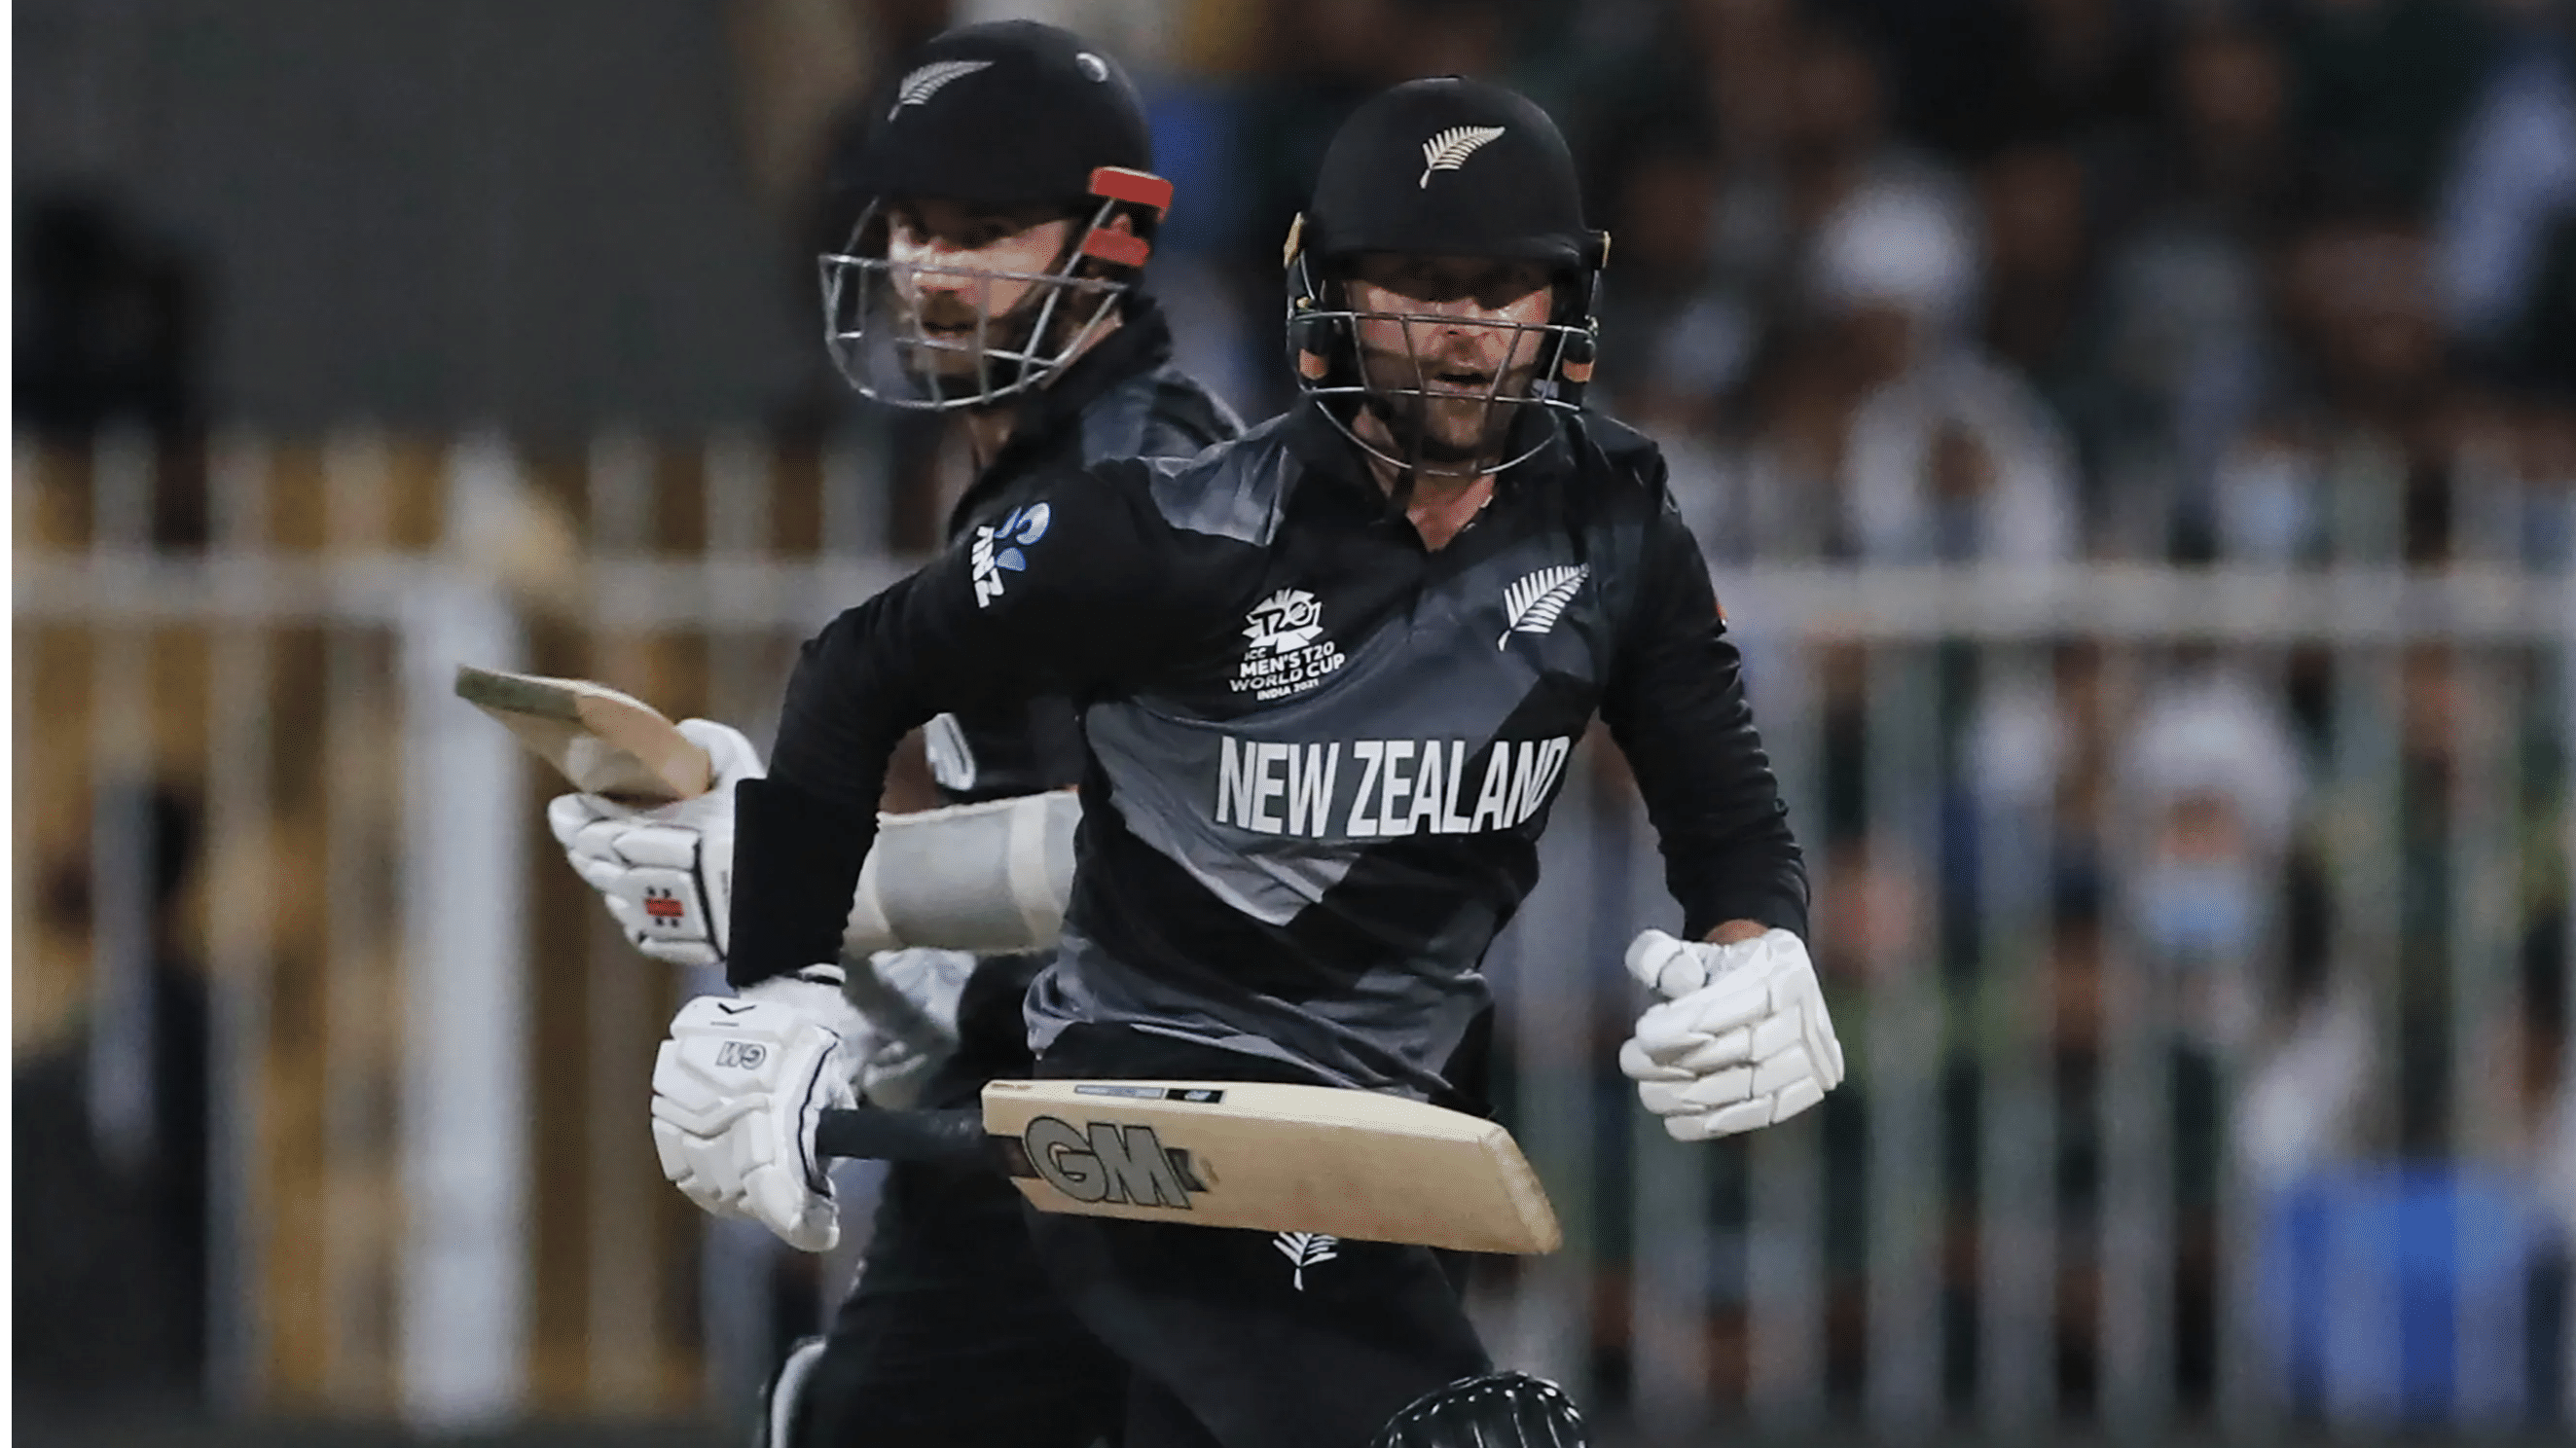 T20 World Cup, New Zealand vs Scotland: When and where to watch live telecast, streaming